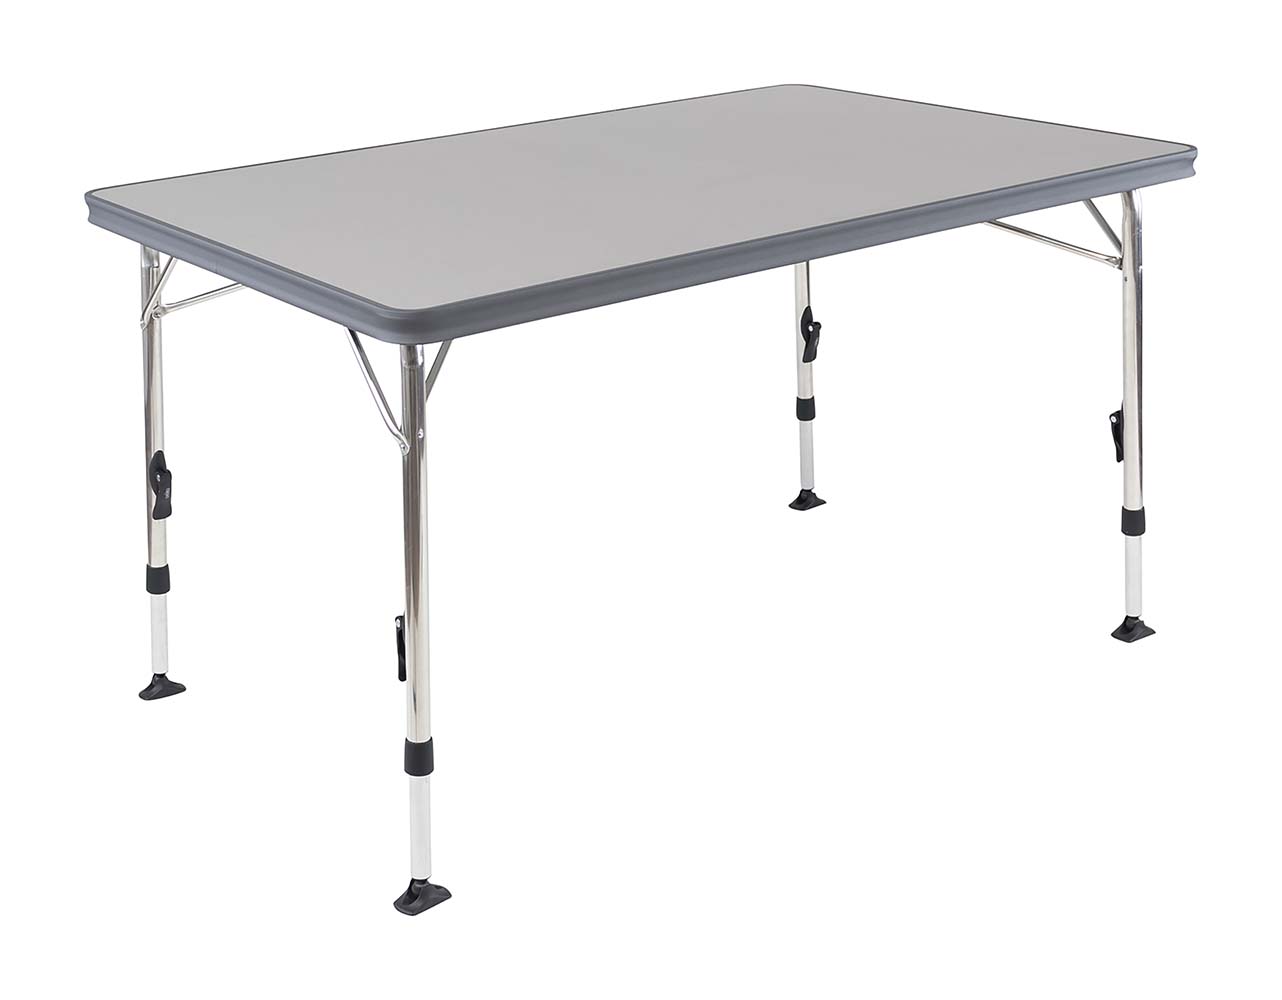 1151385 A luxurious and stylish table. This lightweight camping table features a heat-resistant and waterproof table top. The table has infinitely adjustable legs (59-74 cm) which can be folded, making this table easy and compact to transport. Because this table has stabilizing feet, it is stable on any surface.